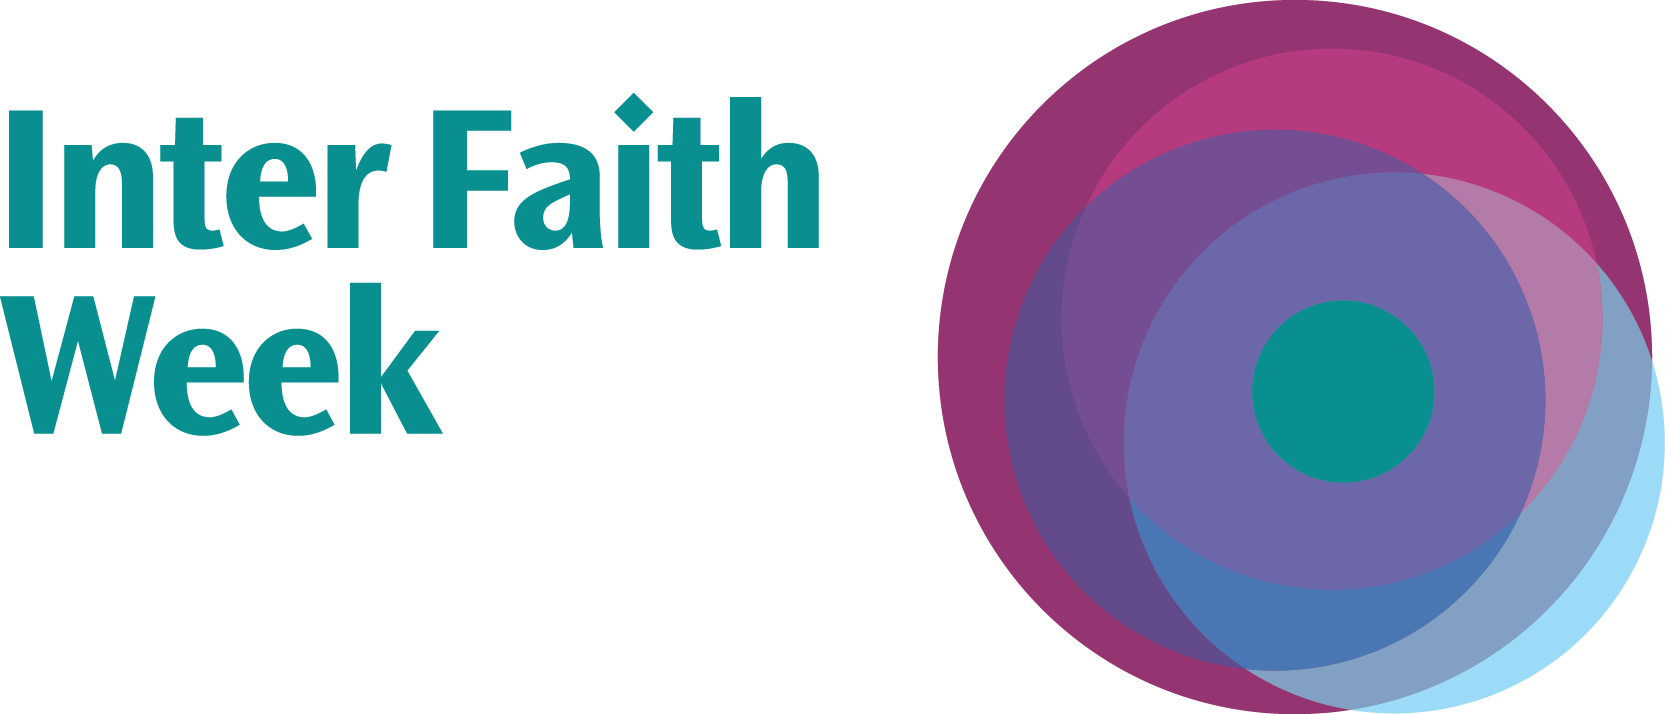 A logo with colourful overlapping circles and the words "Inter Faith Week"